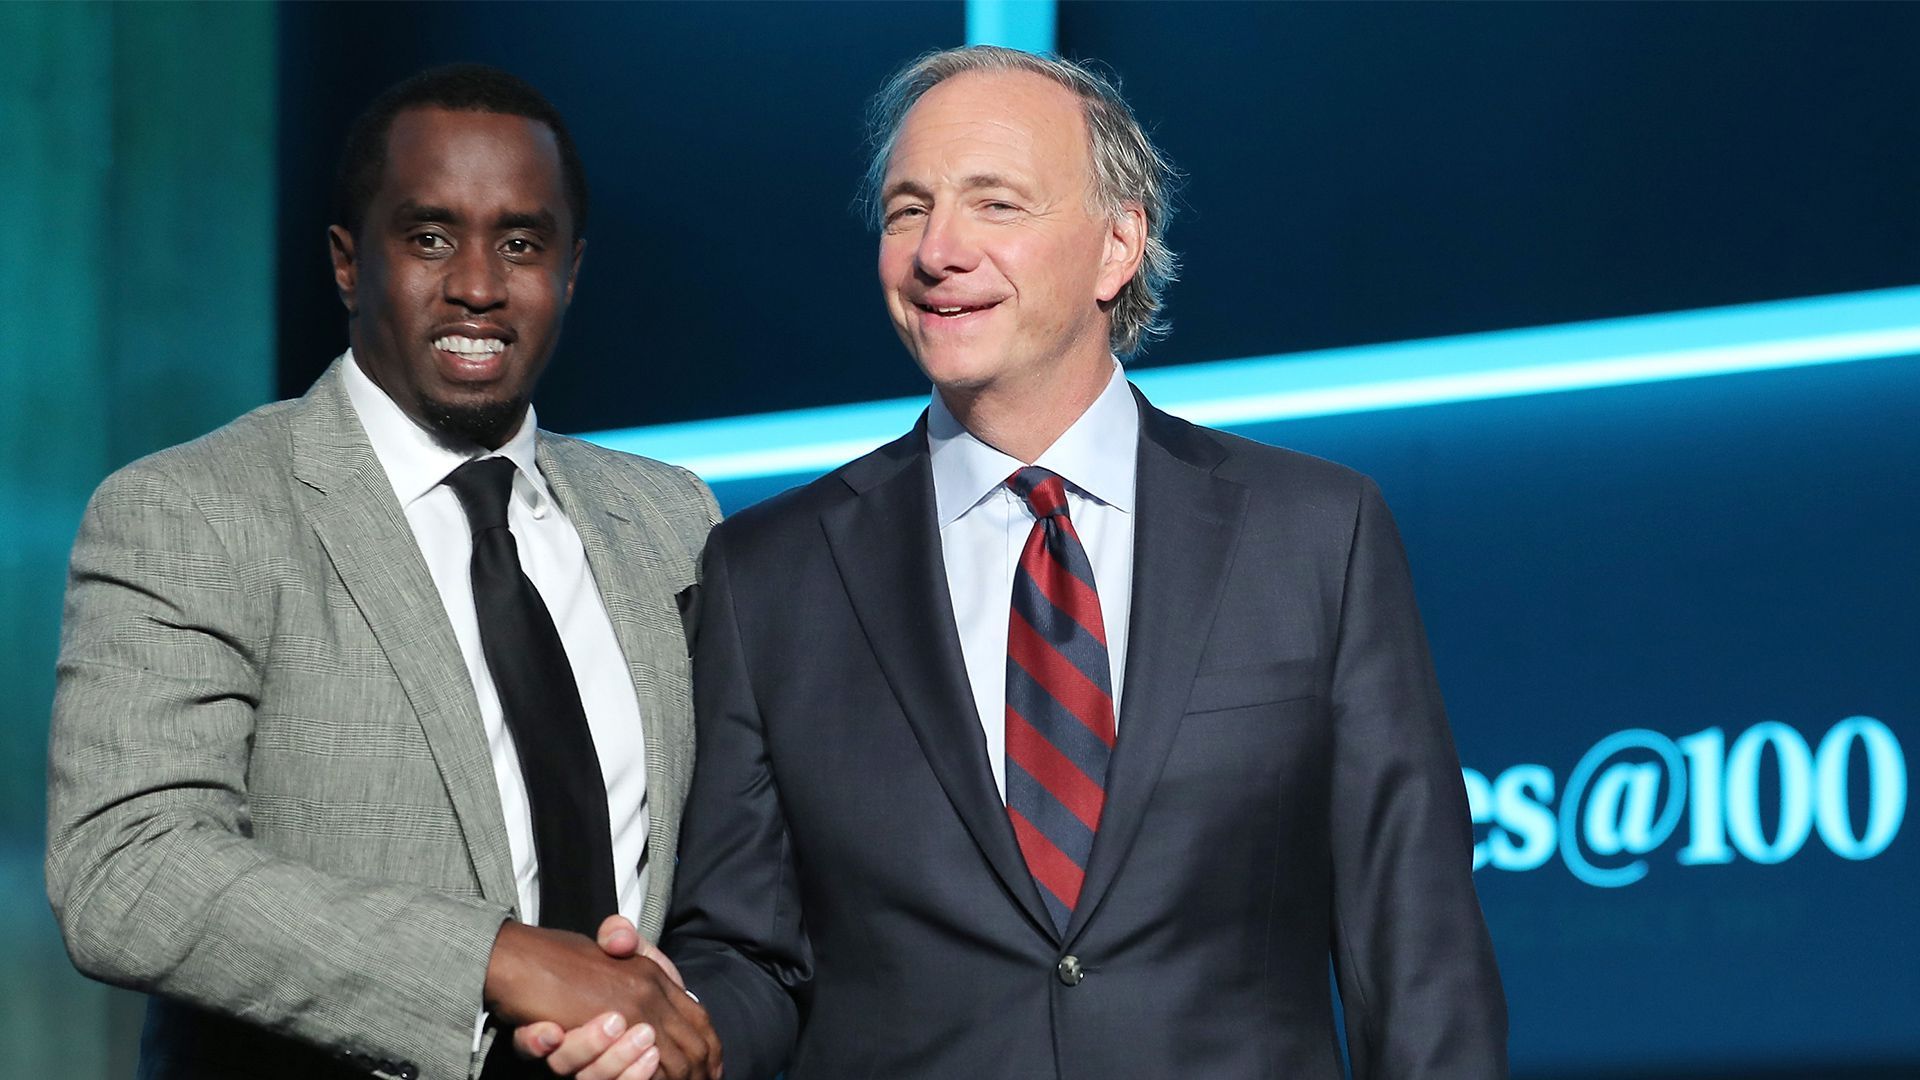 In this image, Dalio and Diddy stand together and shake hands while wearing suits